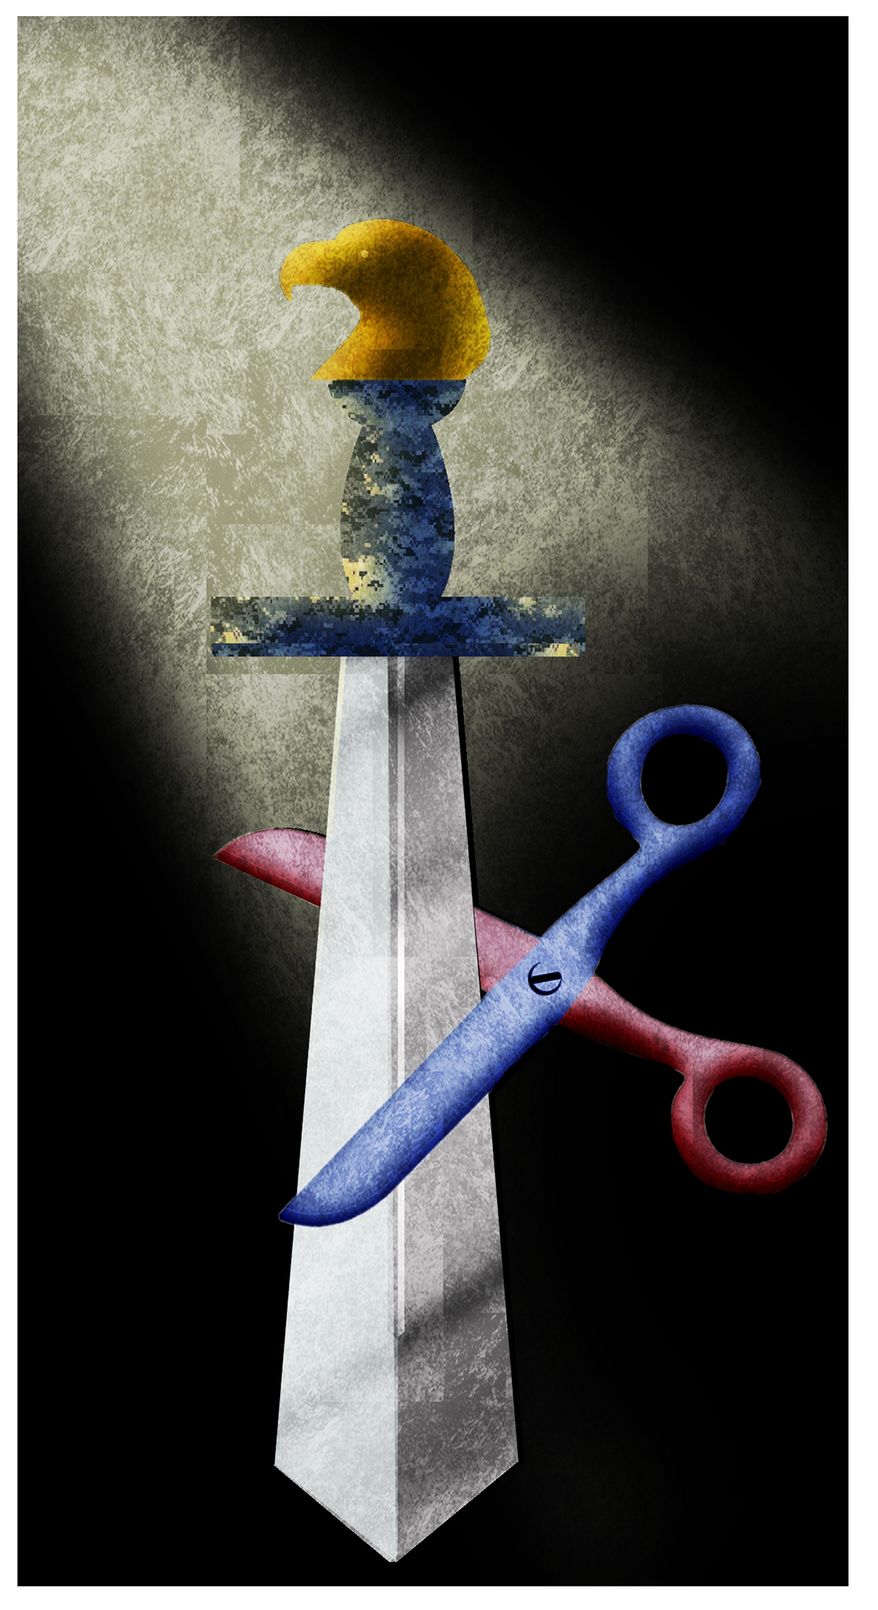 Illustration on cuts to the defense budget by Alexander Hunter/The Washington Times